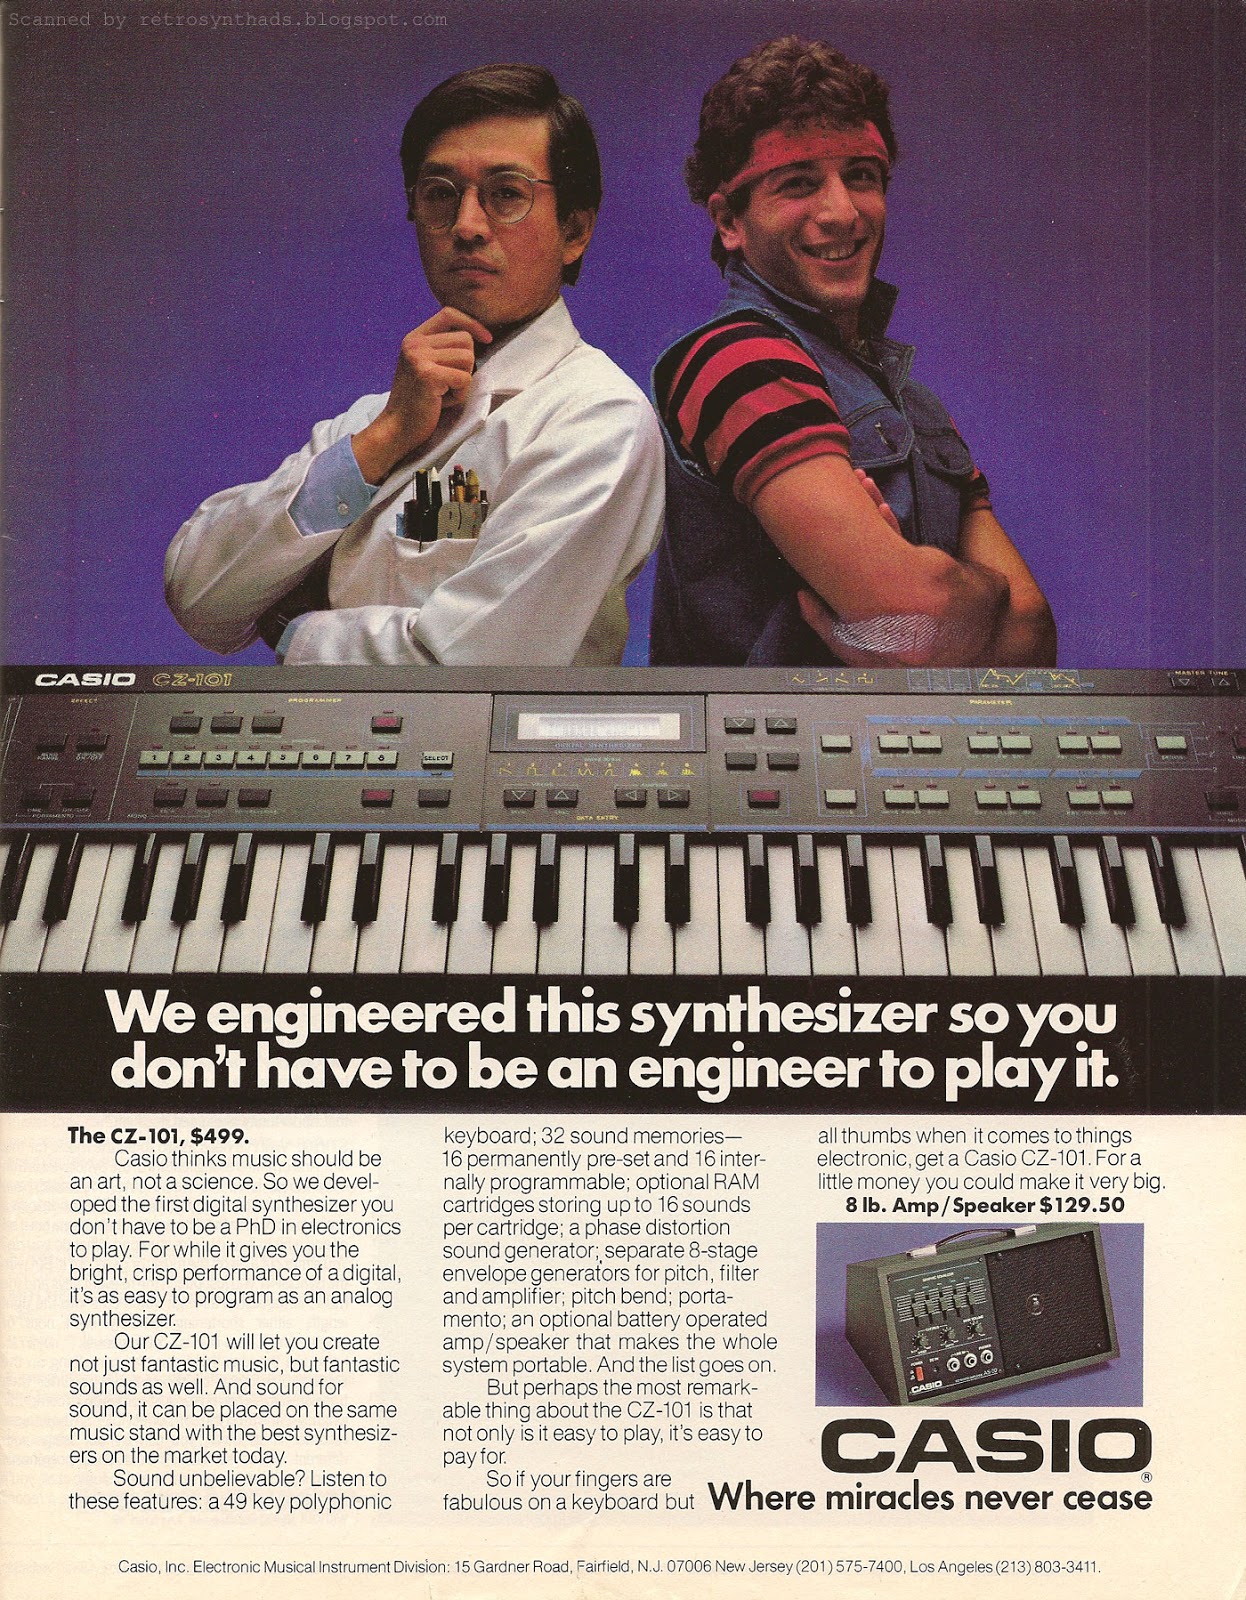 Retro Synth Casio CZ-101 "We engineered this synthesizer so..." ad, Keyboard 1985